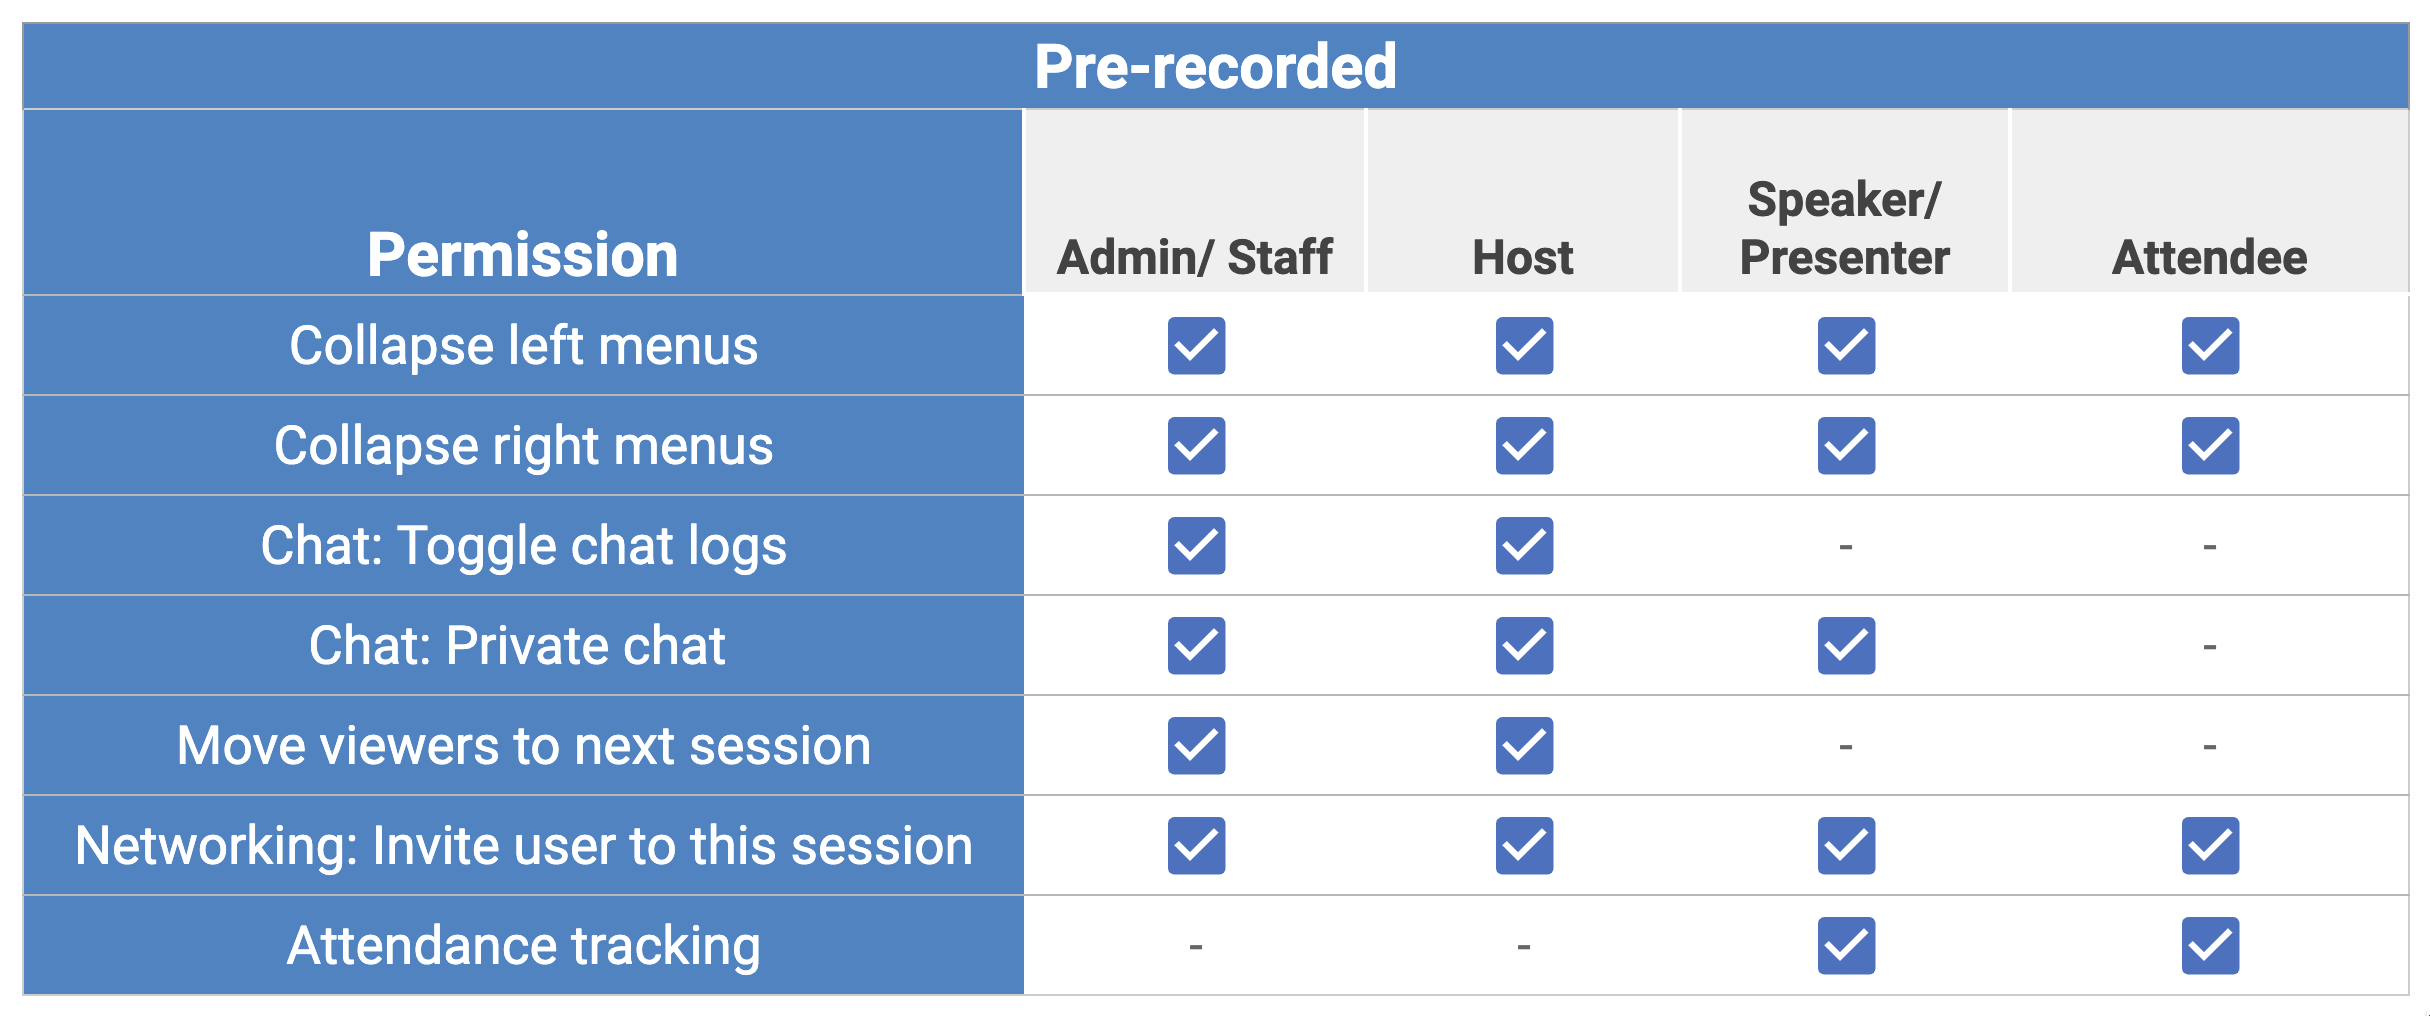 Table showing what each permission level can do in the Pre-recorded room video mode